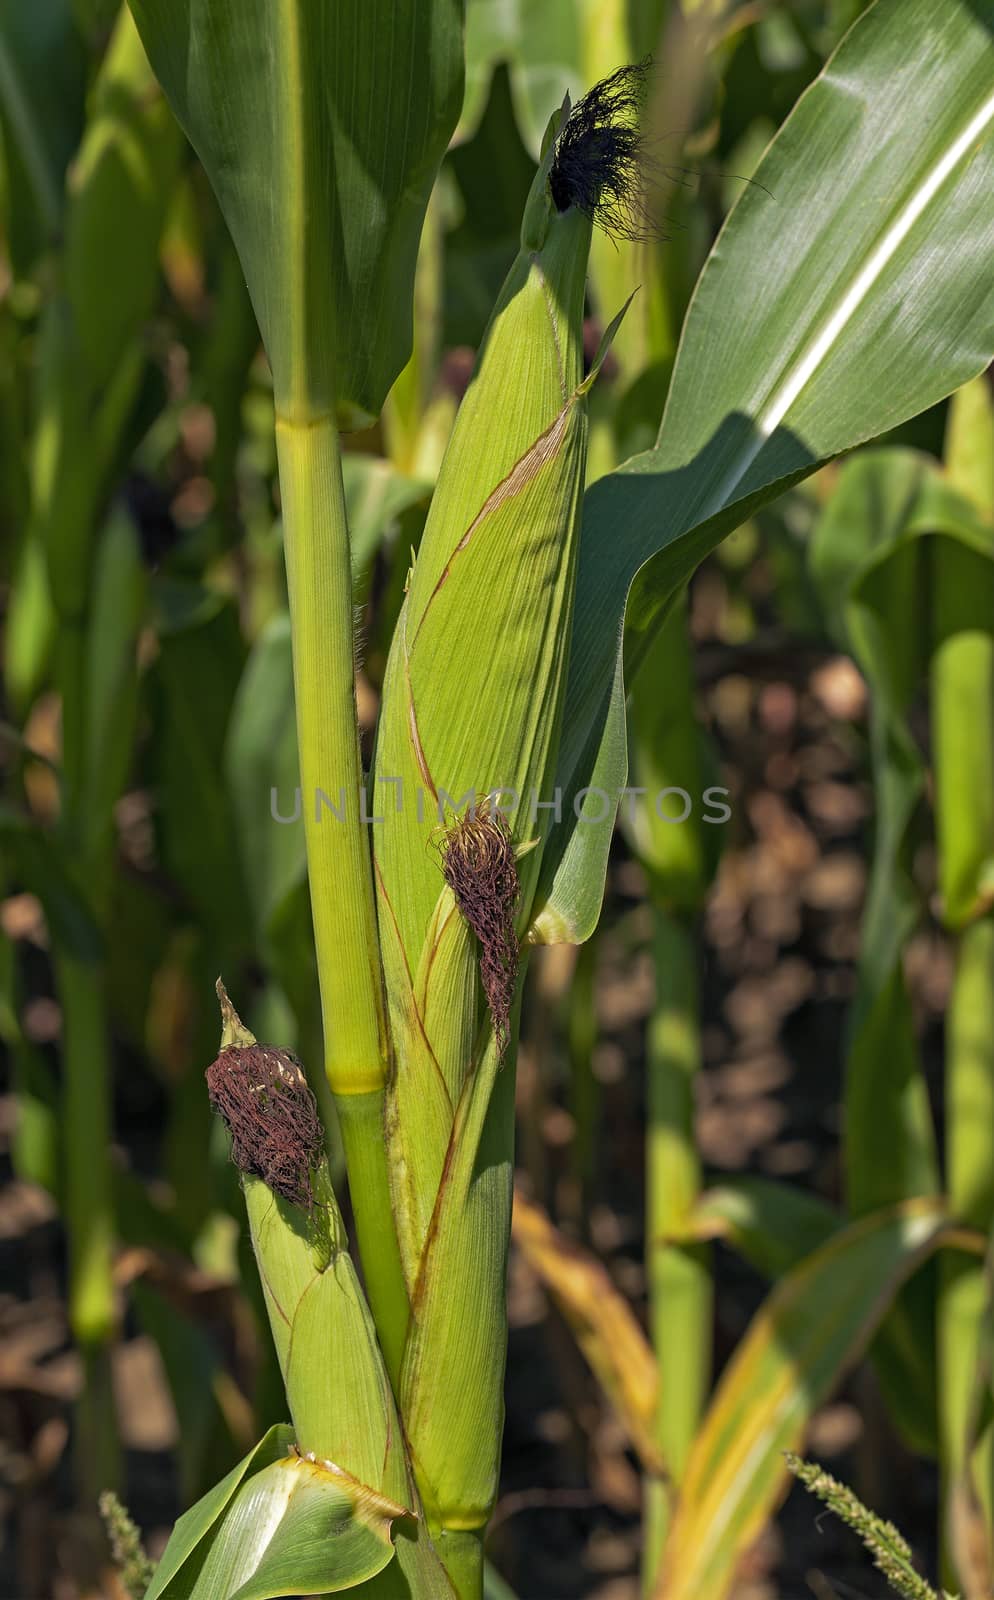   photographed by a close up ears of green corn.